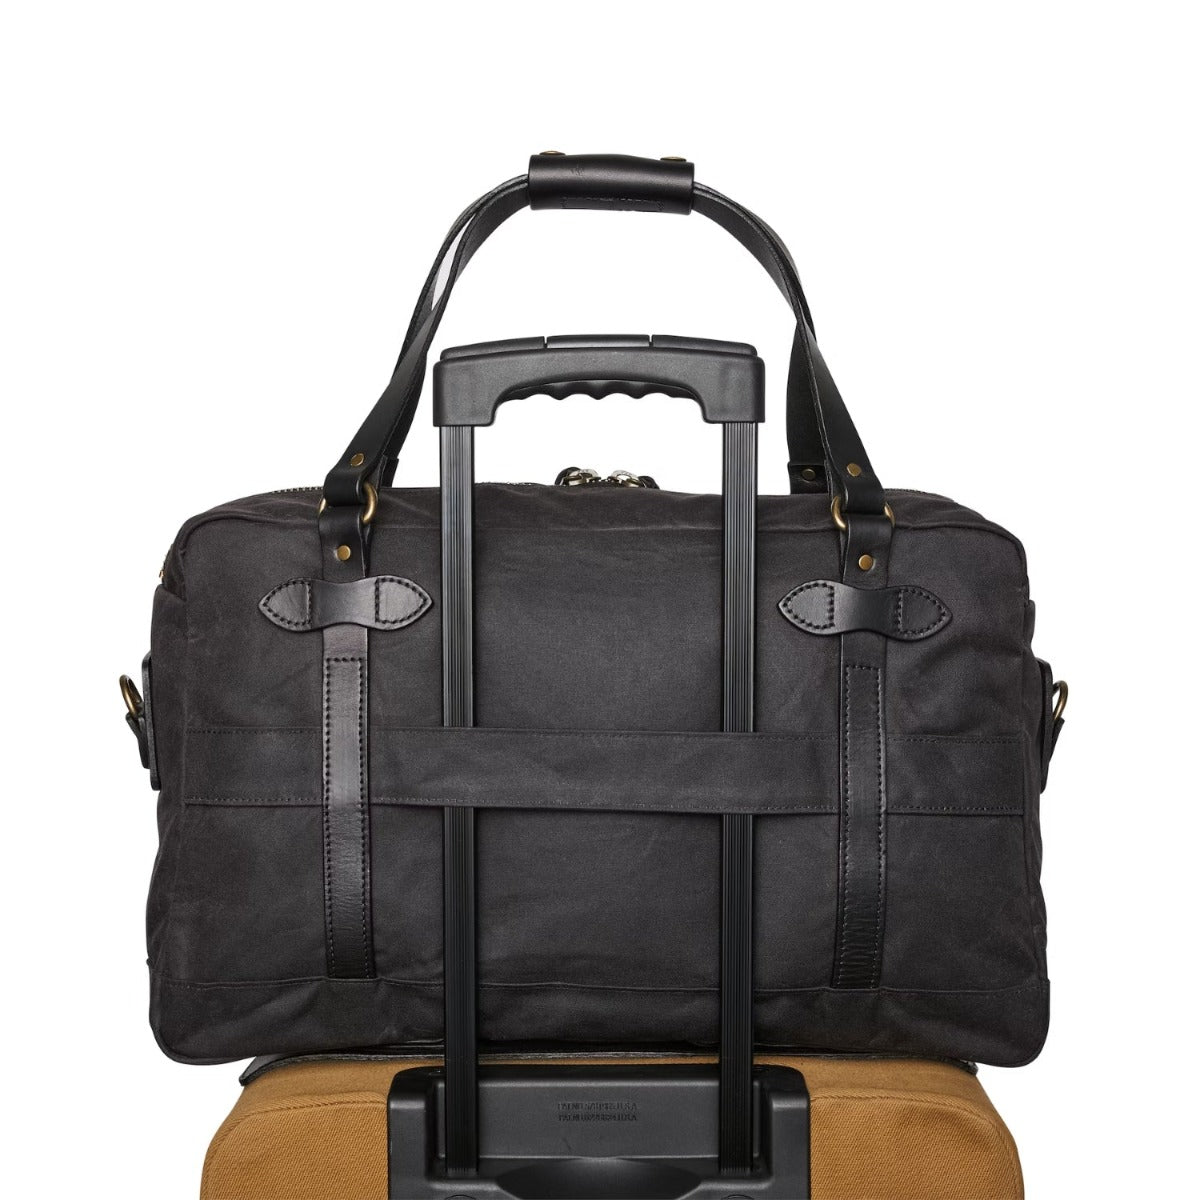 Filson 48 Hour Duffle in Cinder